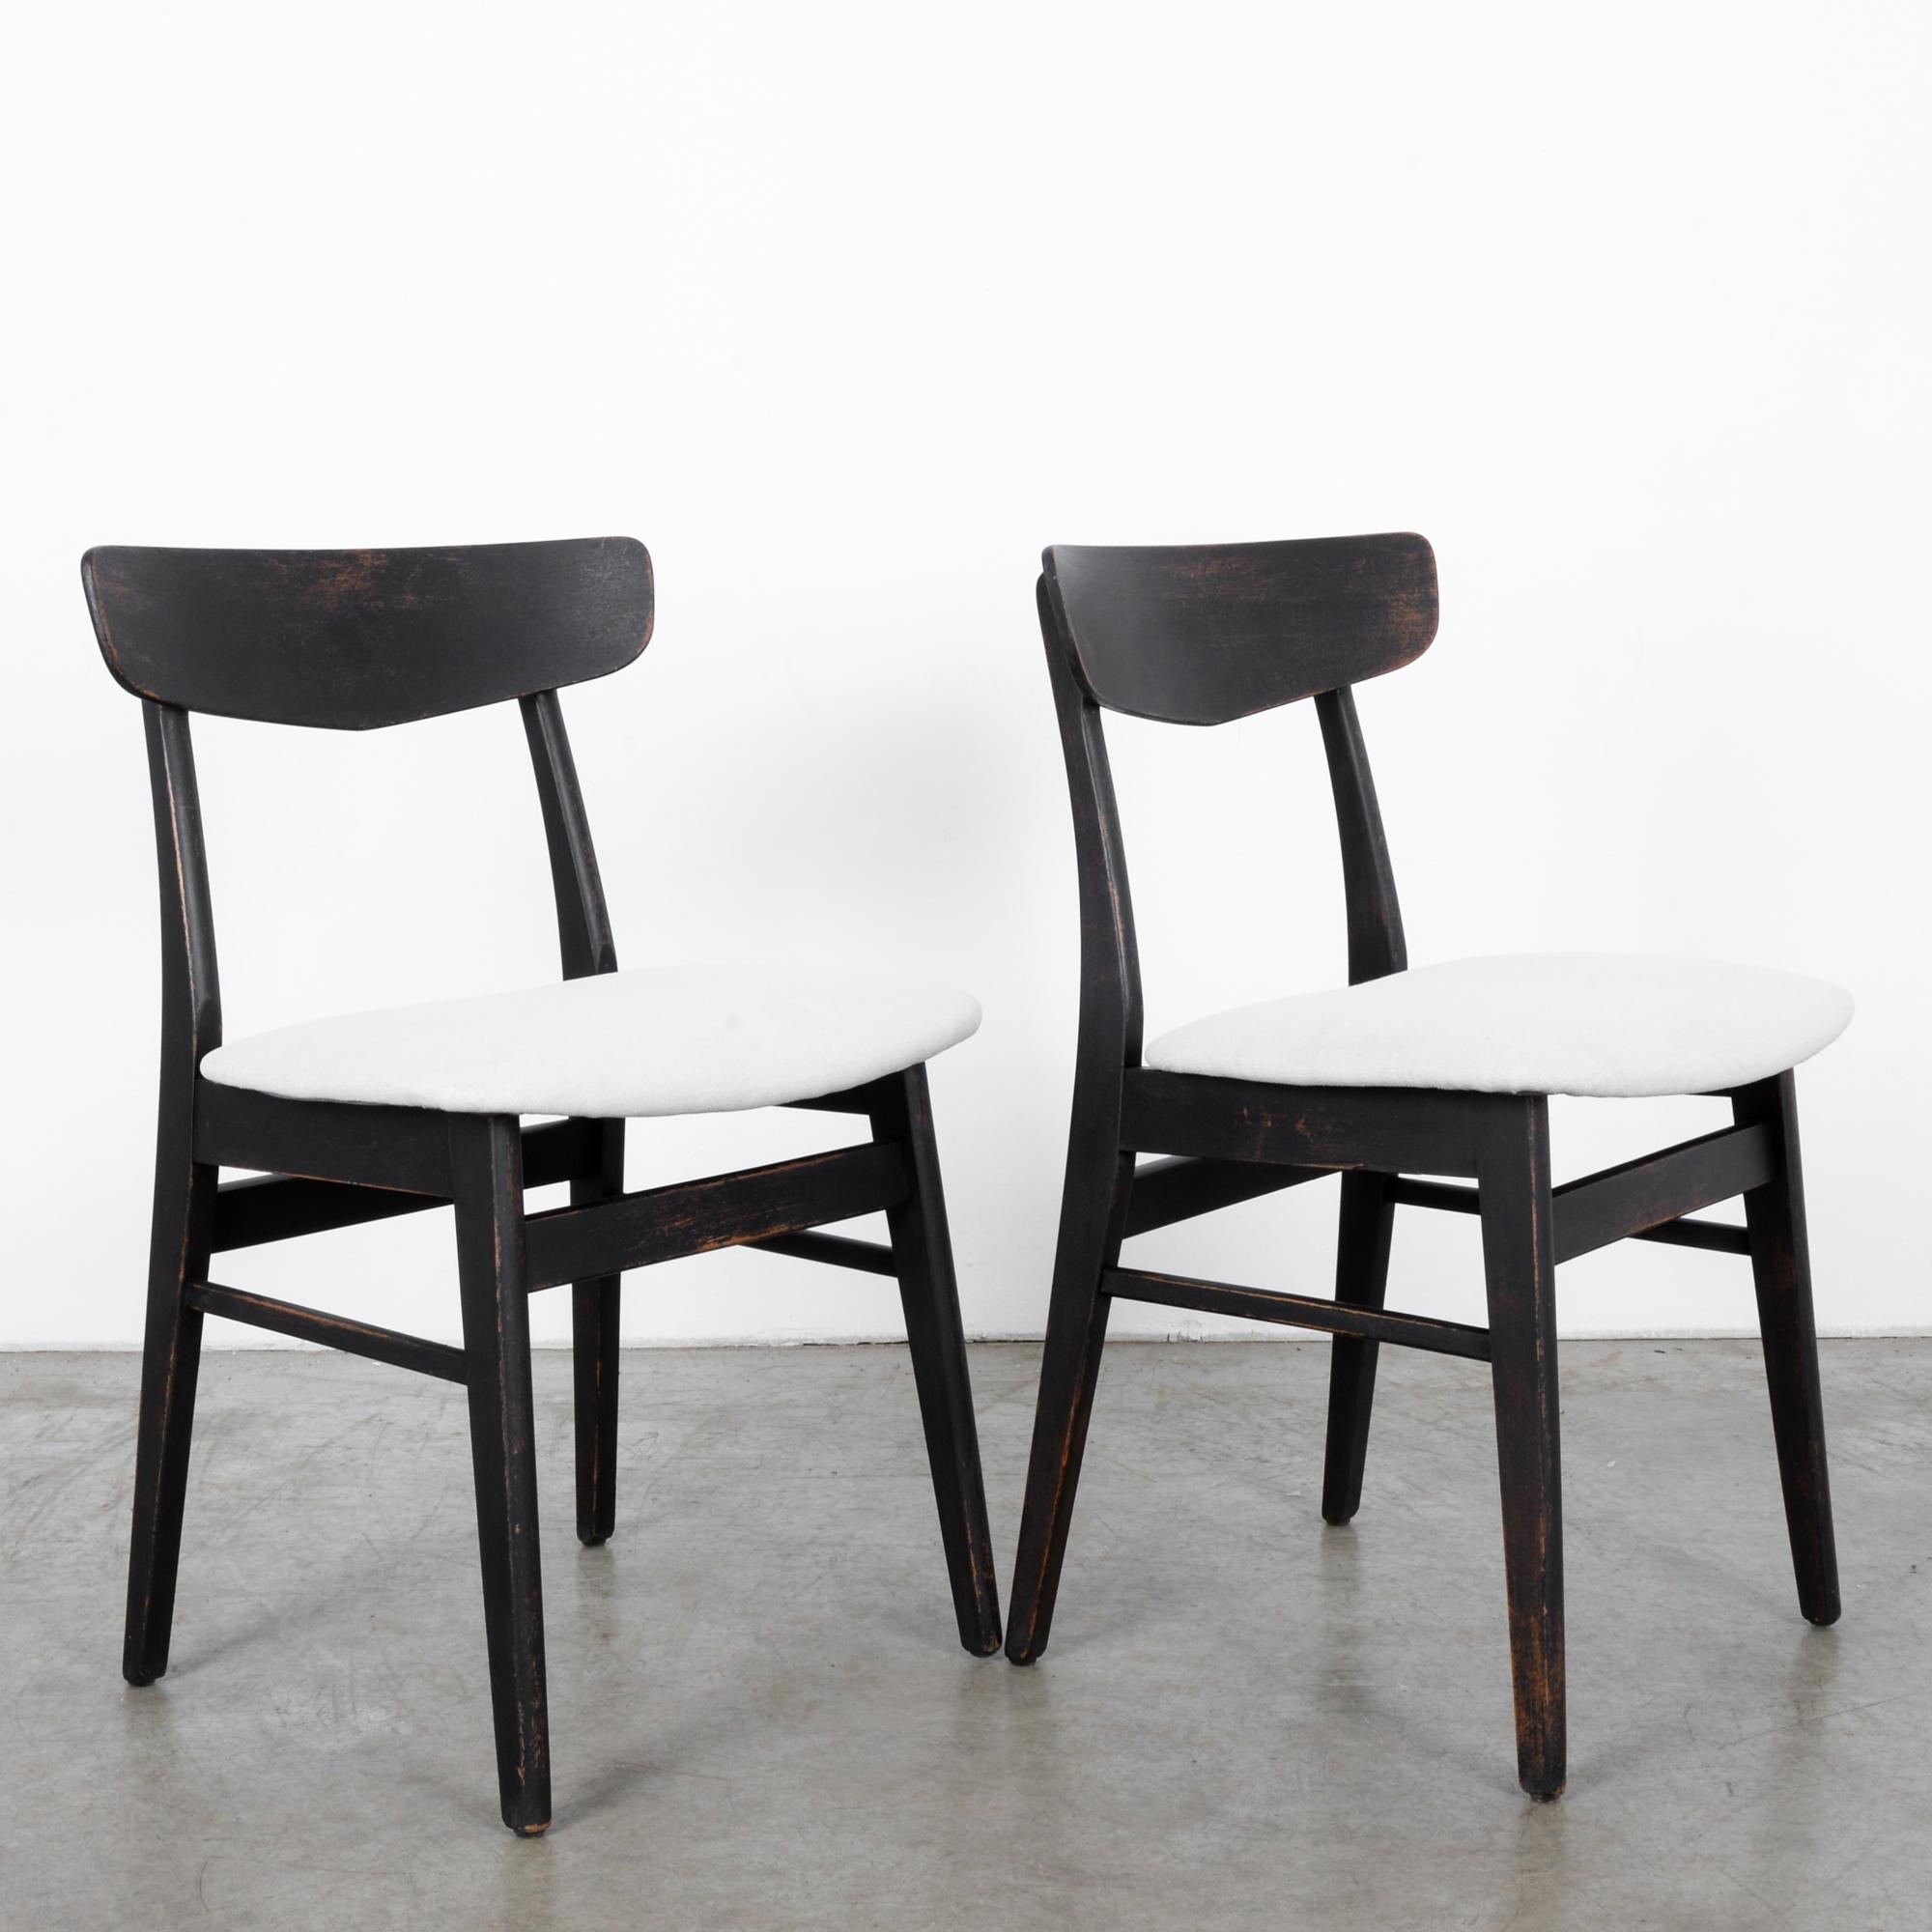 Mid-Century Modern 1960s Danish Upholstered Black Chairs, a Pair